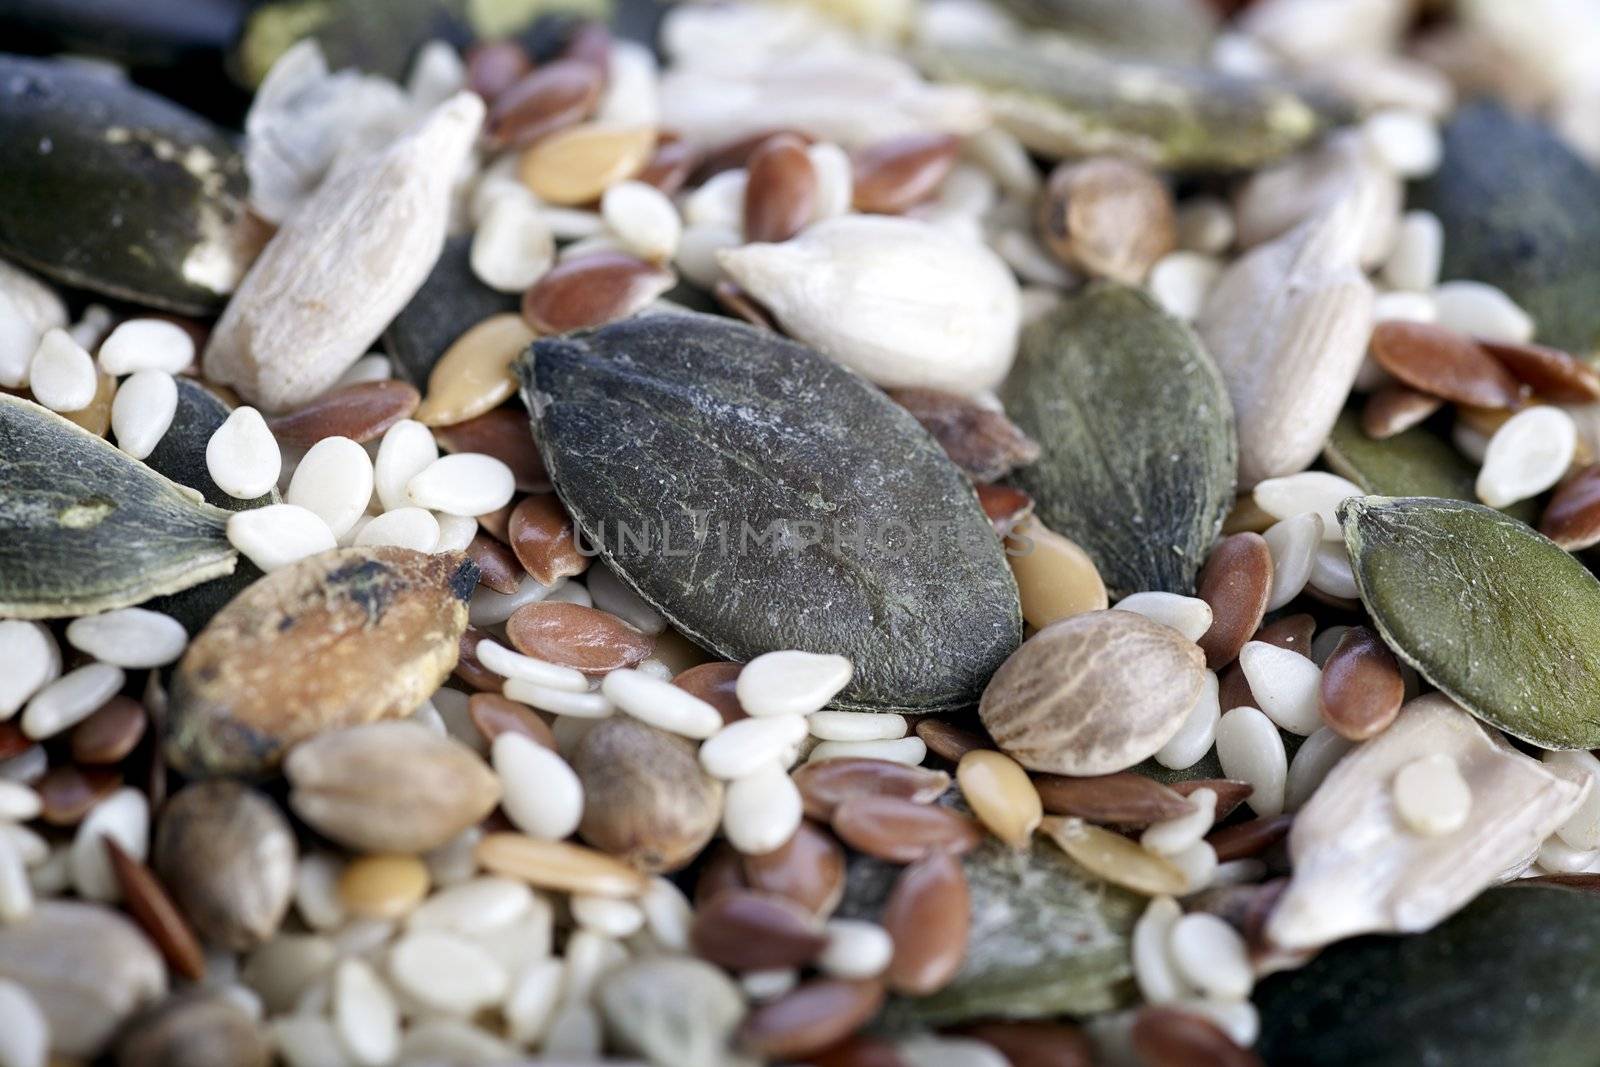 Closeup of mix of seeds high in omega fatty acids with pumpkin seed in center.